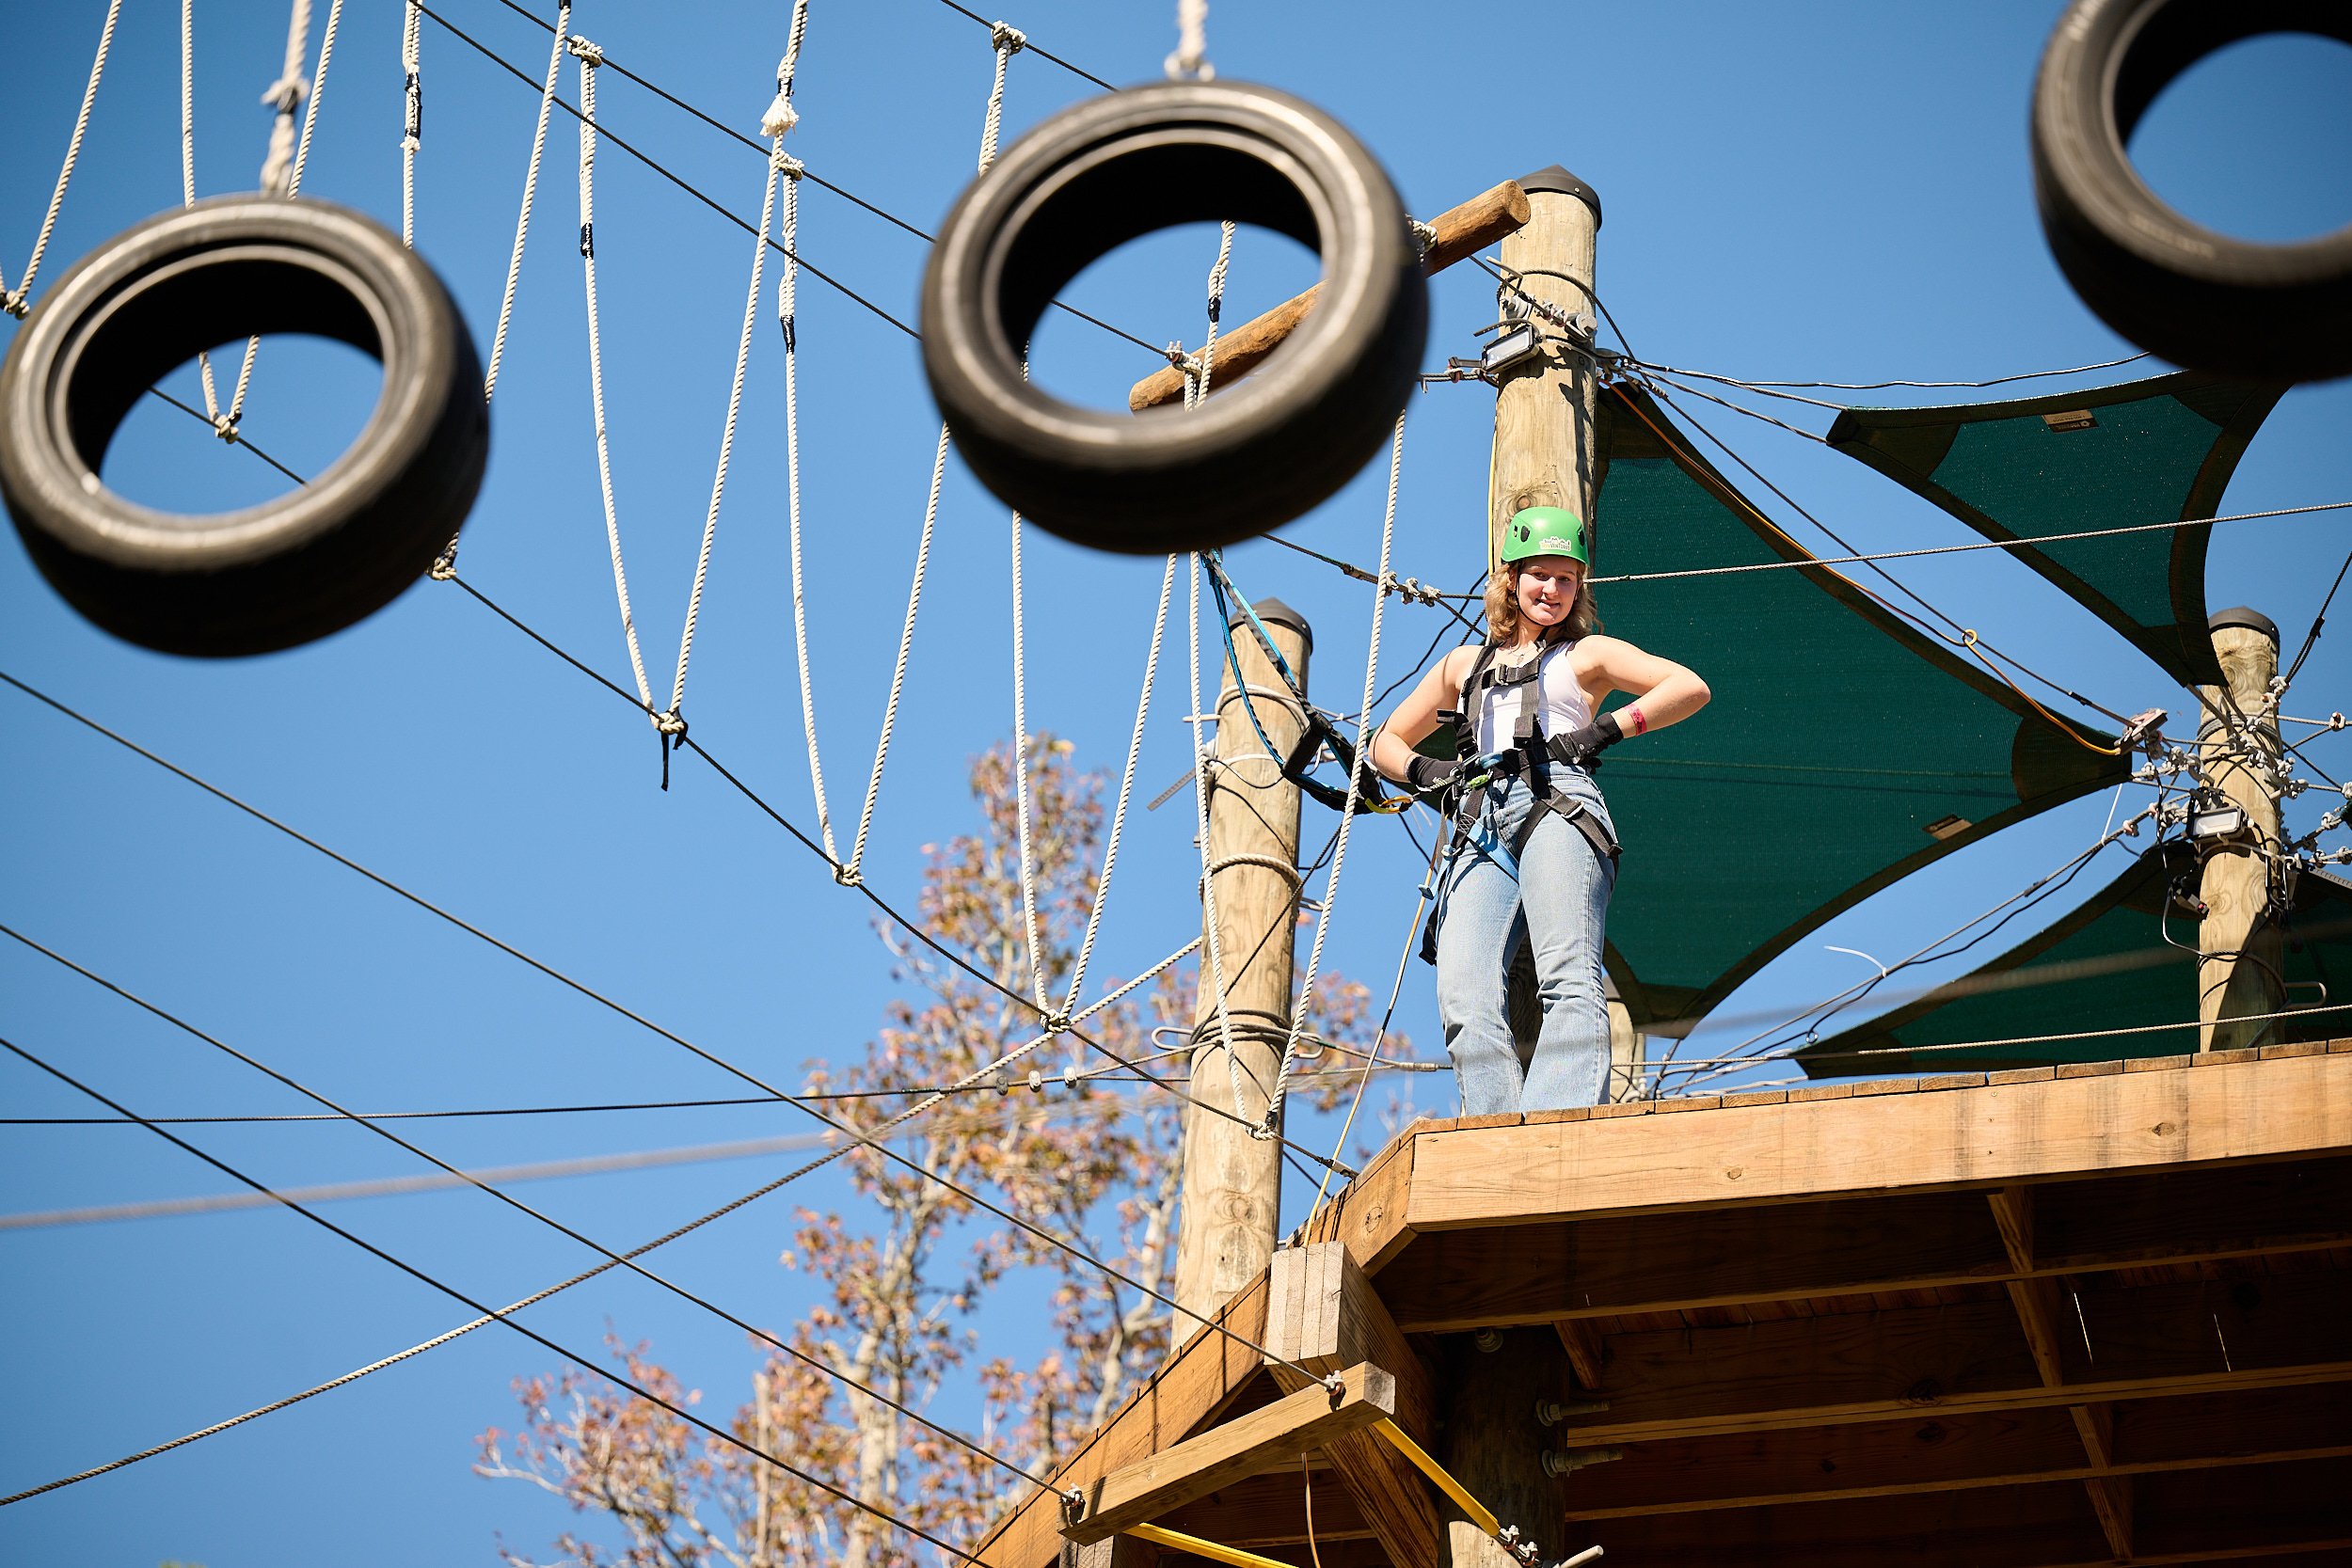  HOUSTON, TEXAS - NOVEMBER 2022: a group of excited teenagers are celebrating their best friend’s 17th birthday at Texas TreeVentures traversing the physically challenging course high above the ground 